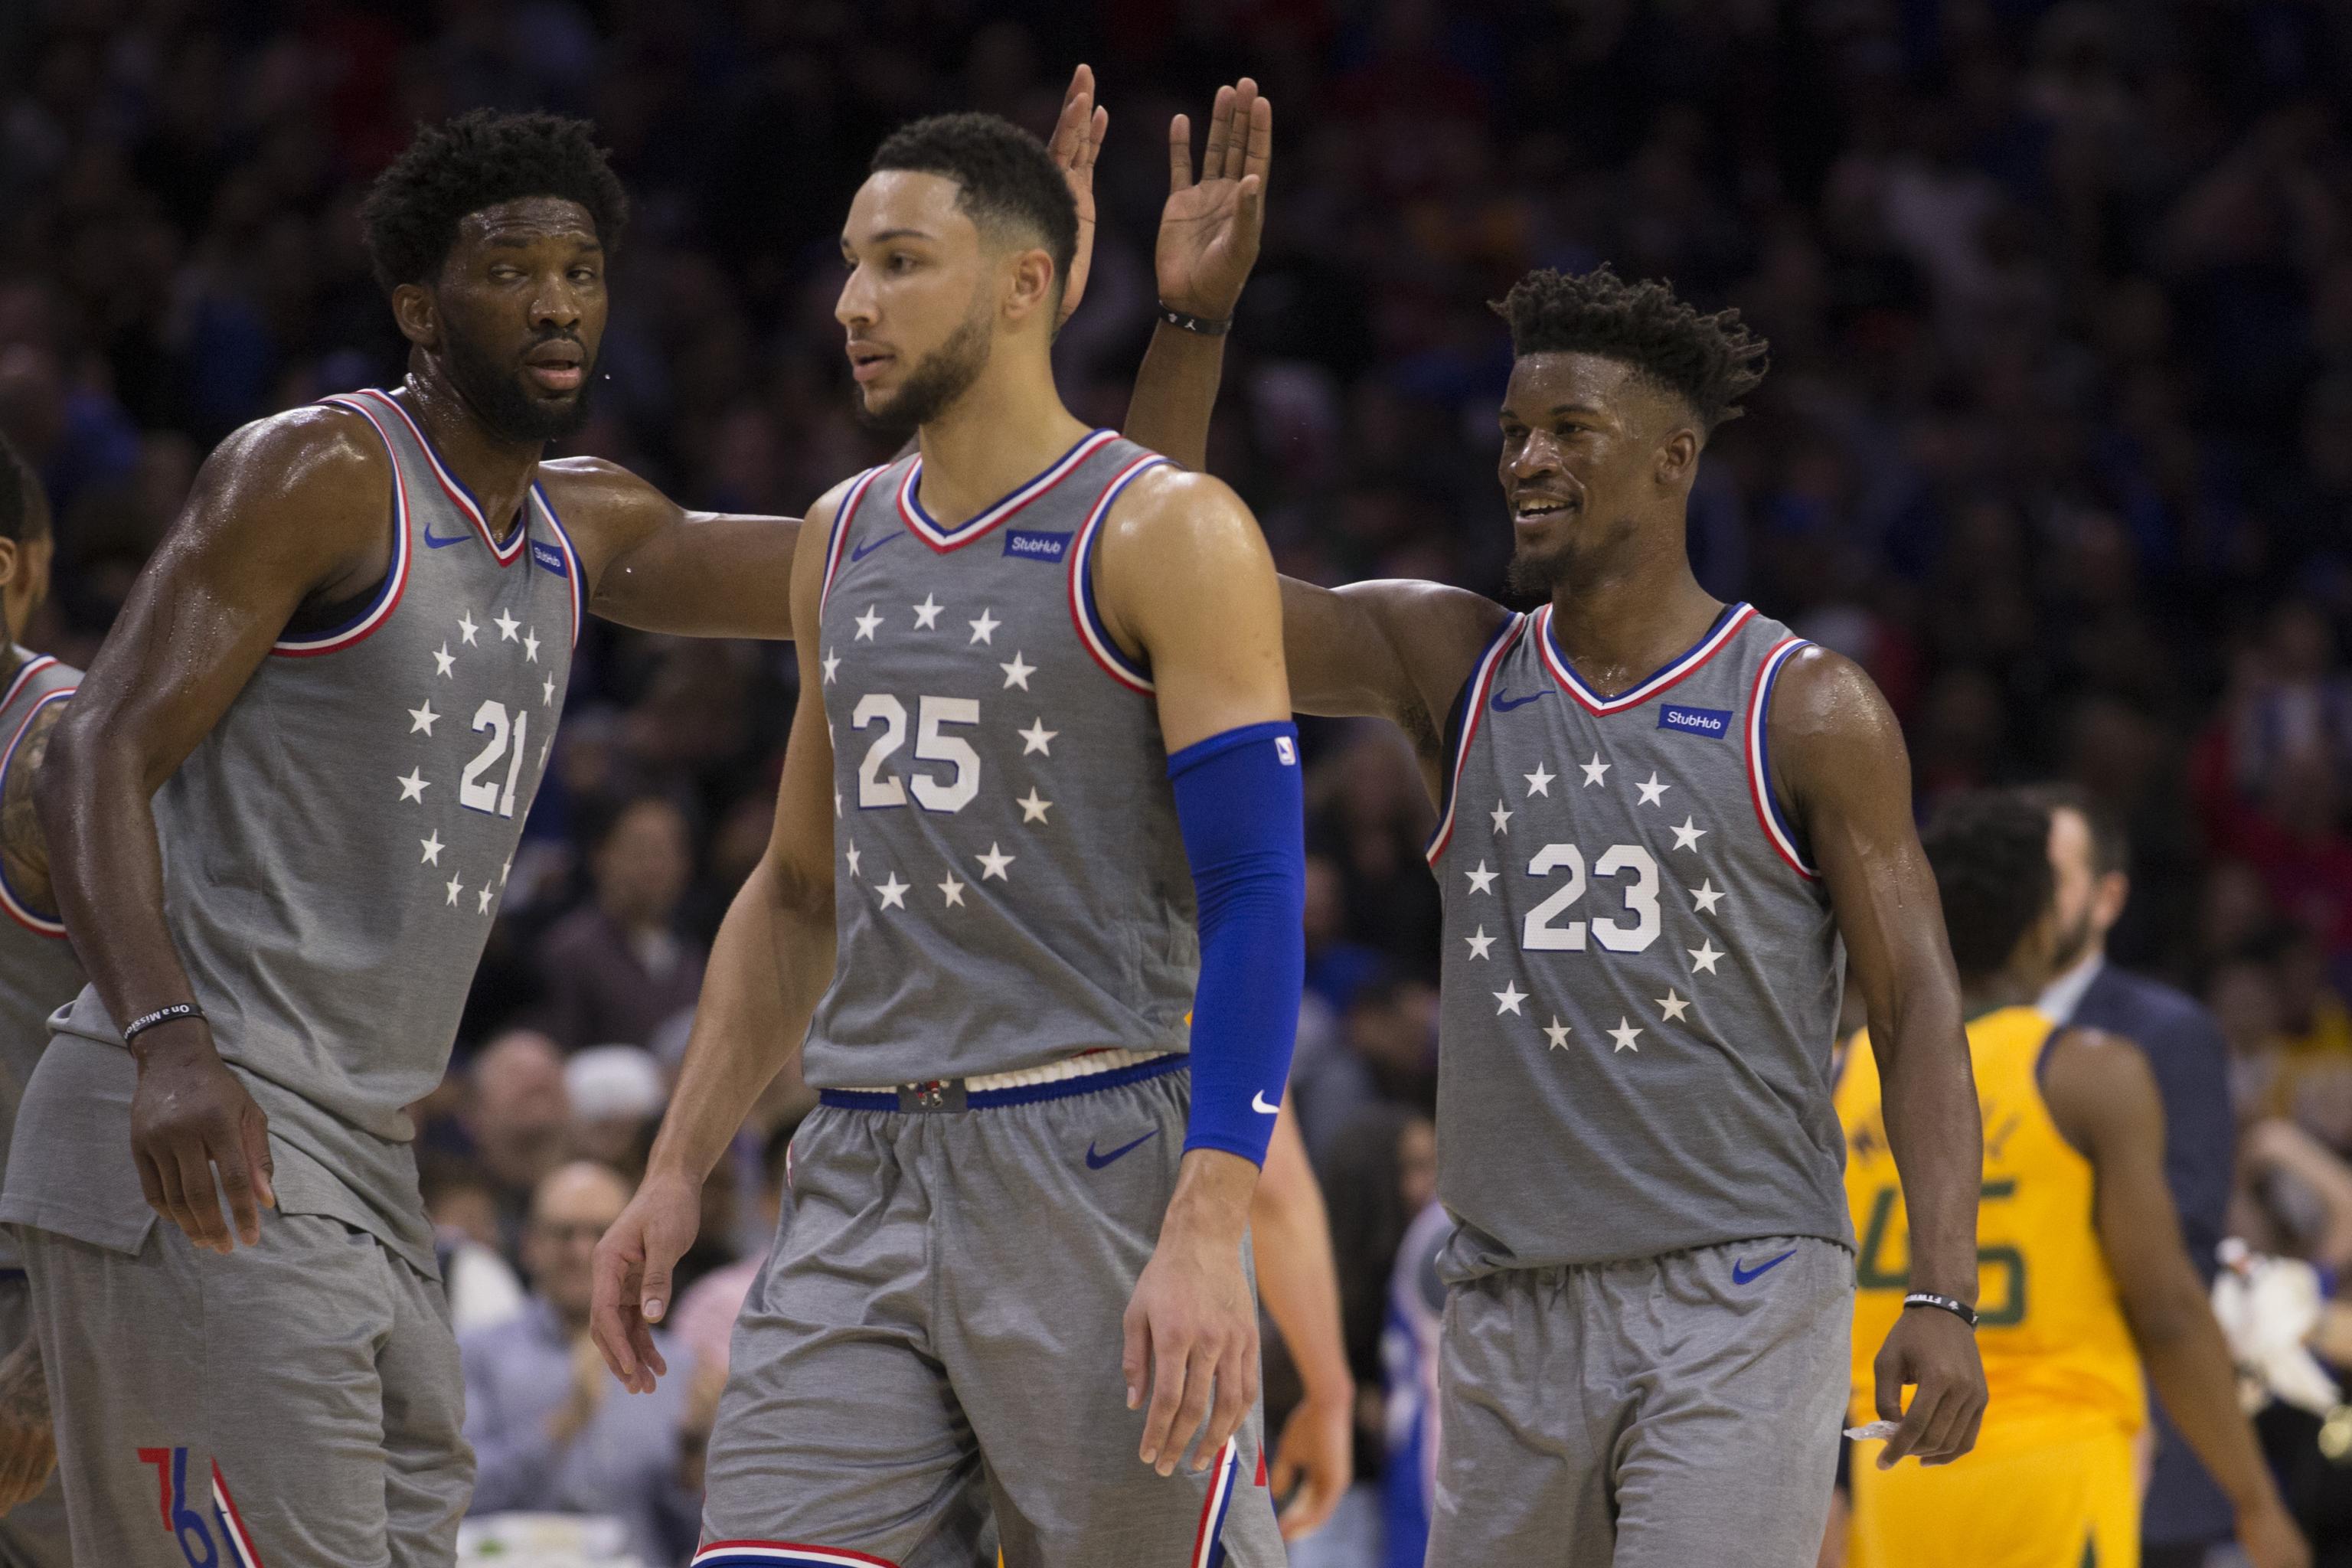 Jimmy Butler (14 points) a loser in debut with Sixers - Chicago Sun-Times